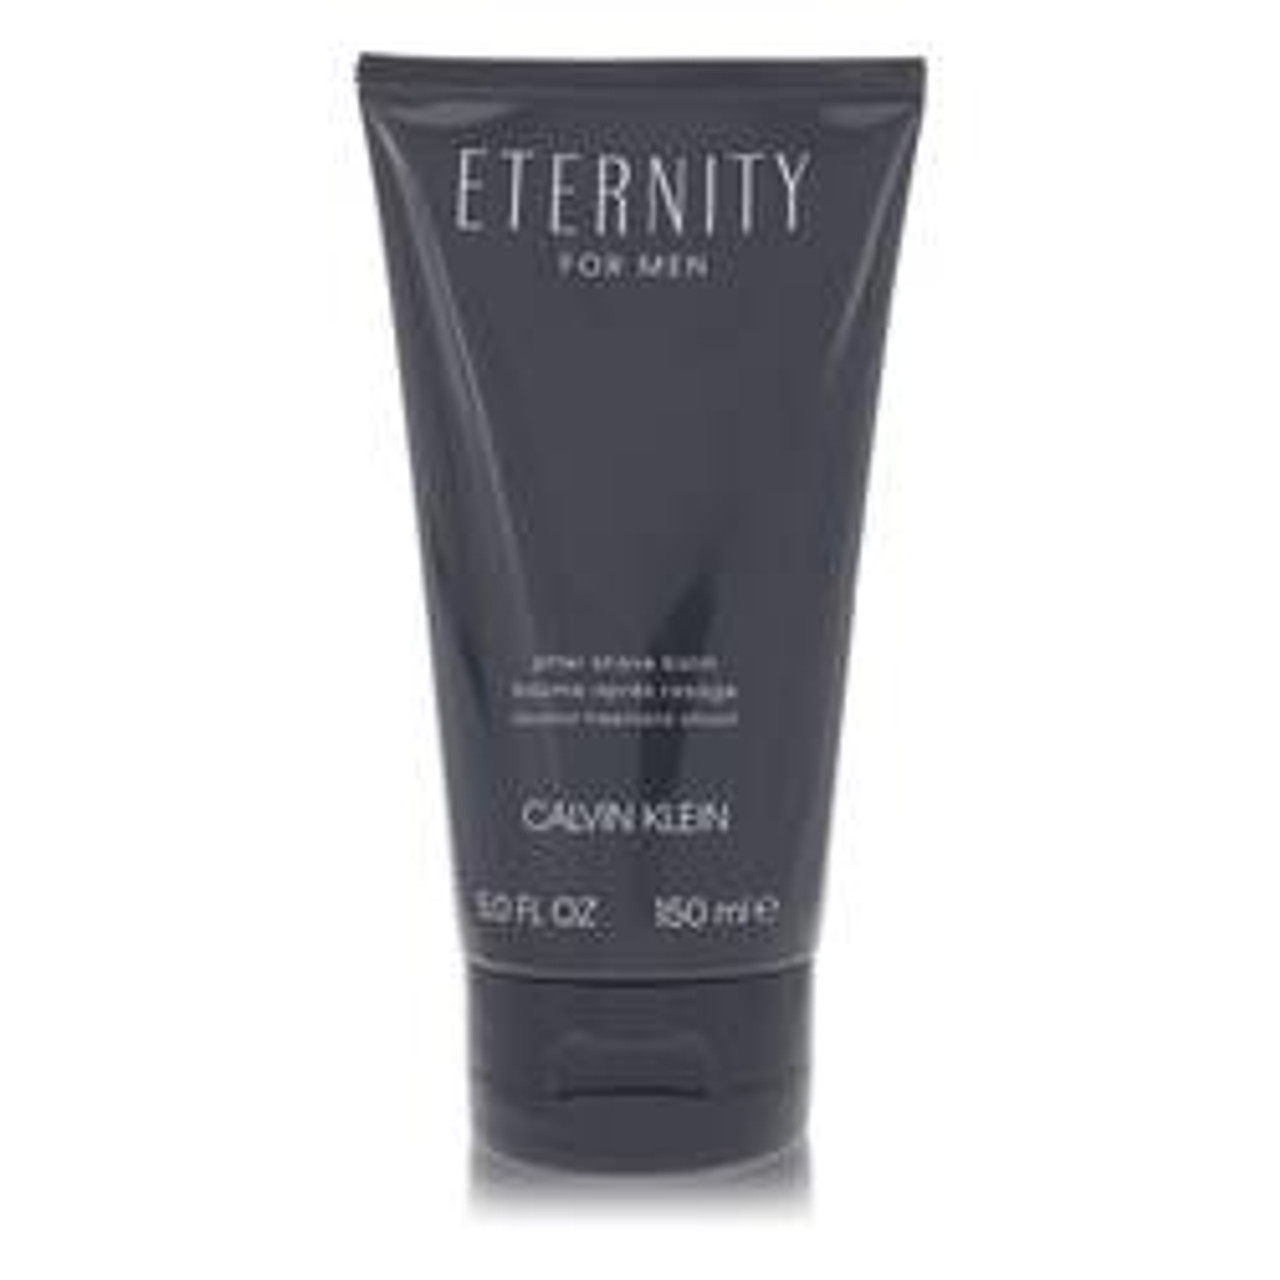 Eternity Cologne By Calvin Klein After Shave Balm 5 oz for Men - [From 92.00 - Choose pk Qty ] - *Ships from Miami